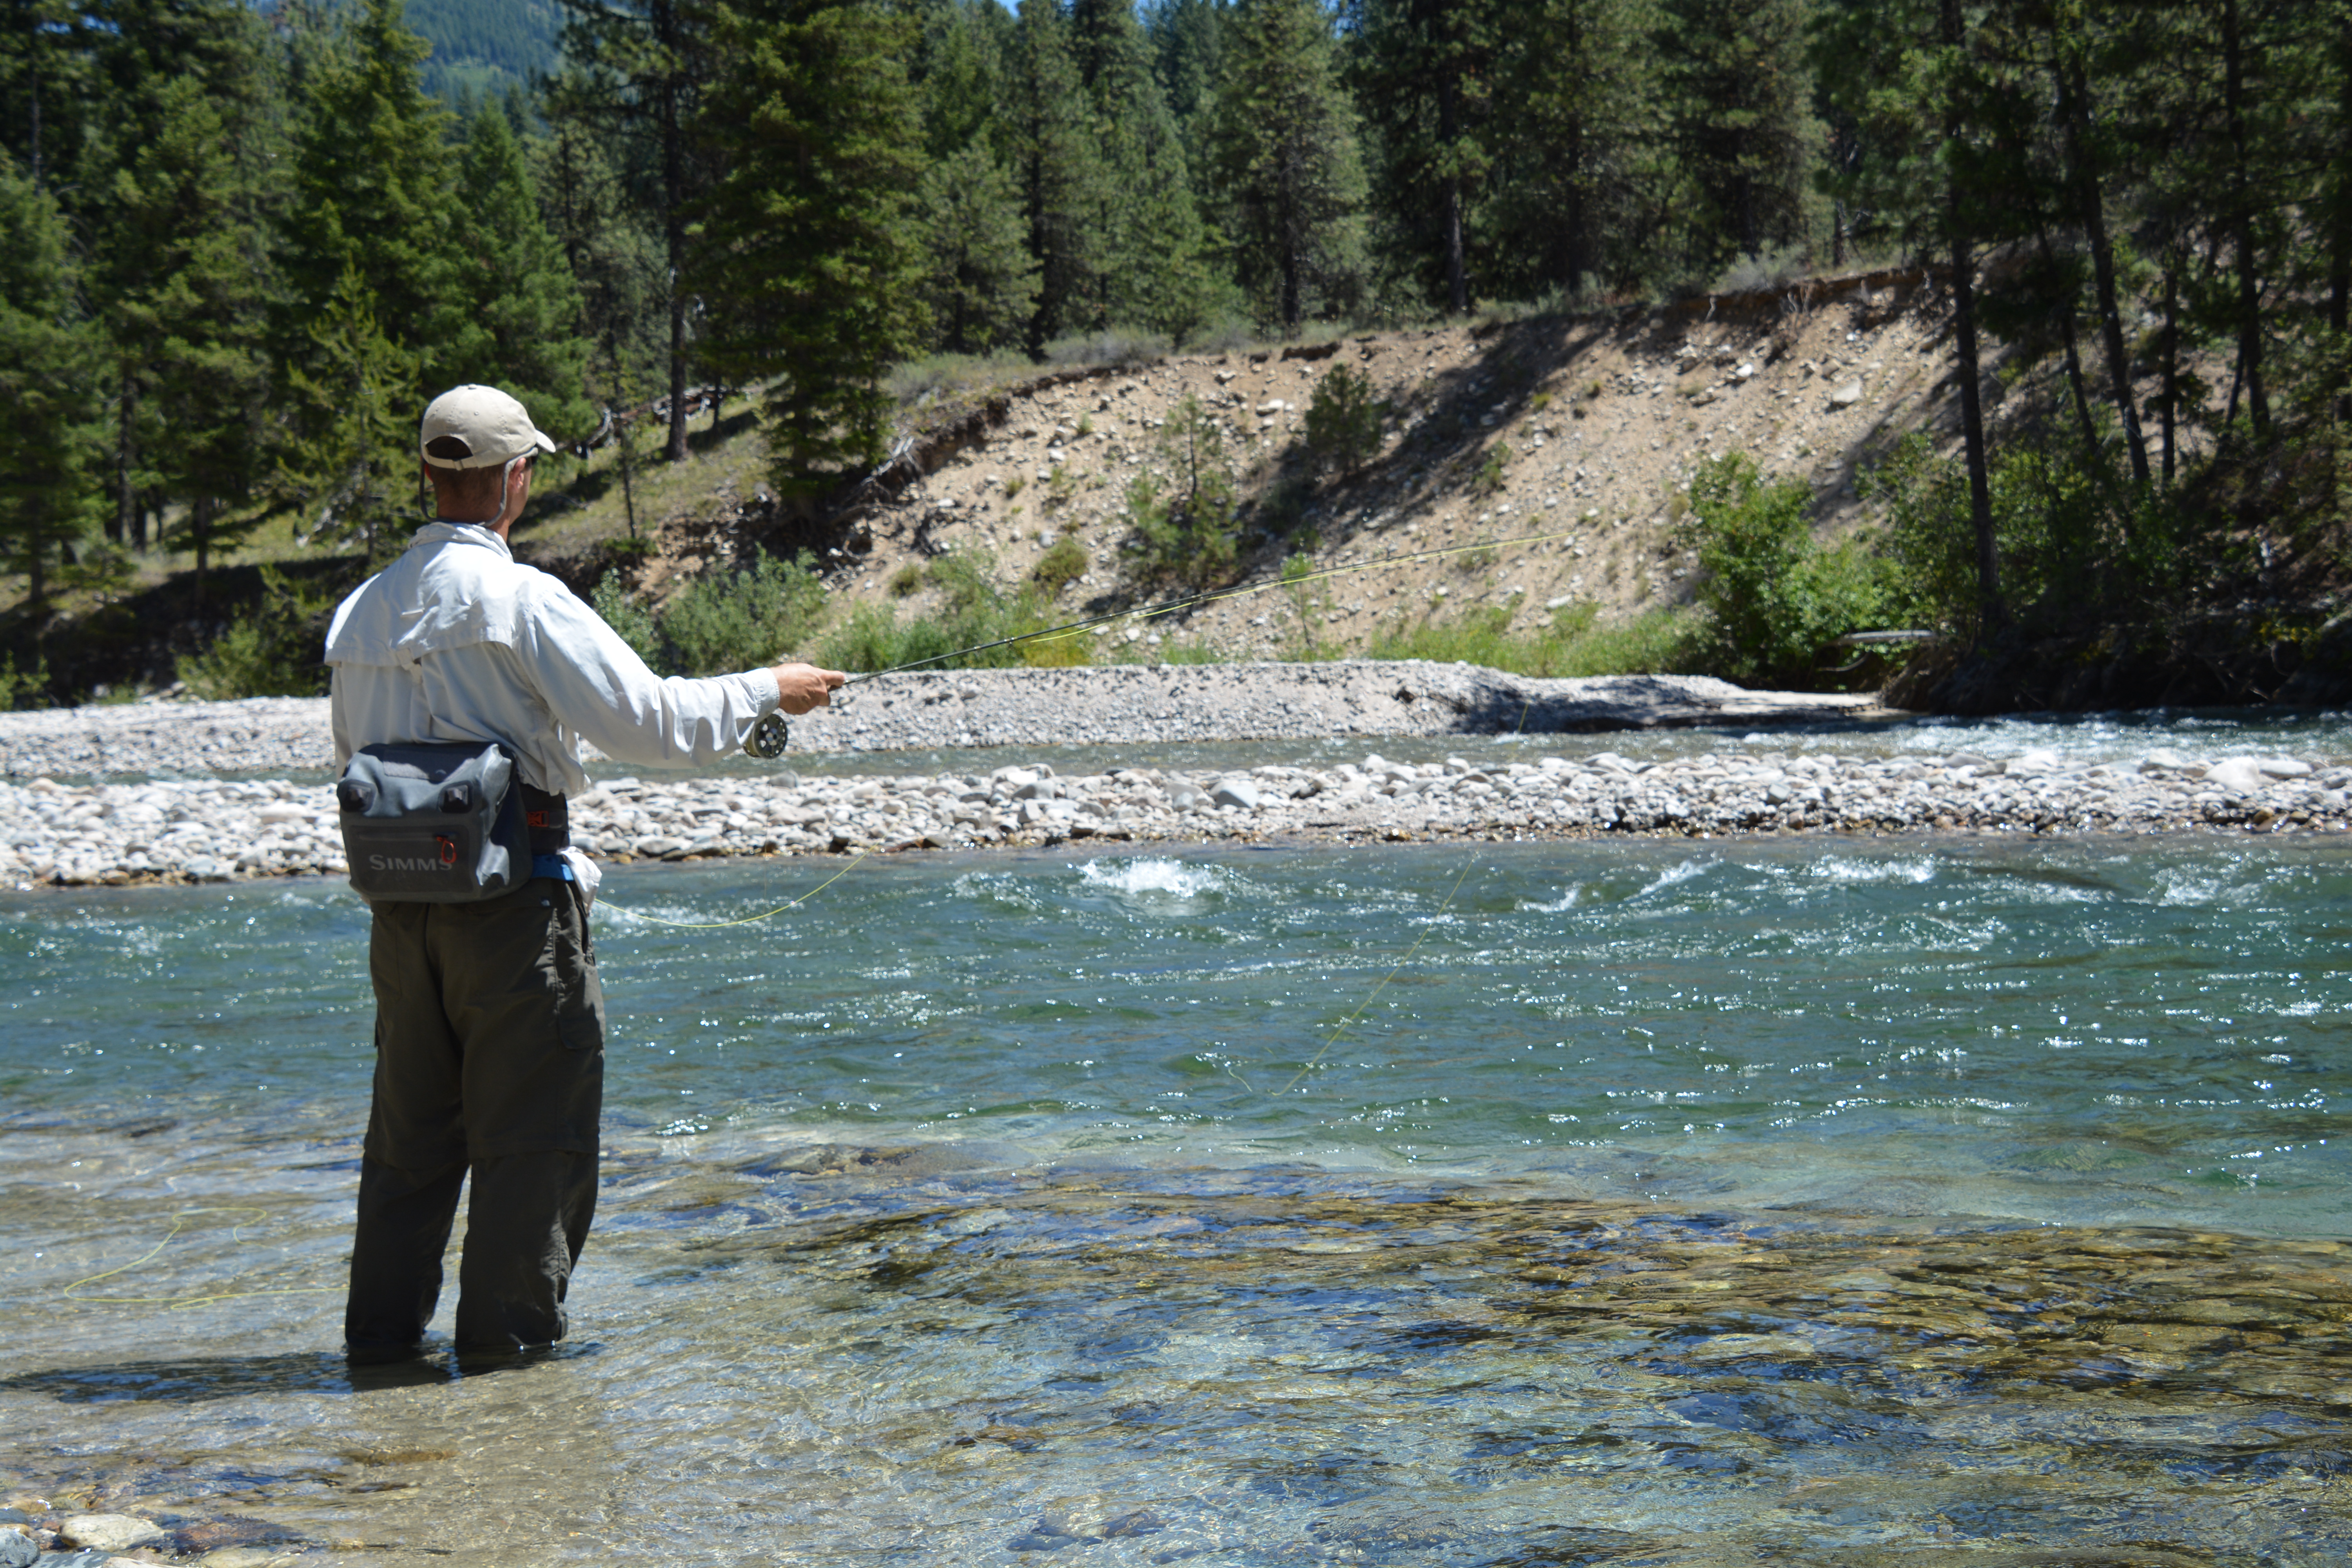 Summer heat will cause some trout mortality, but halting fishing won't  improve the situation